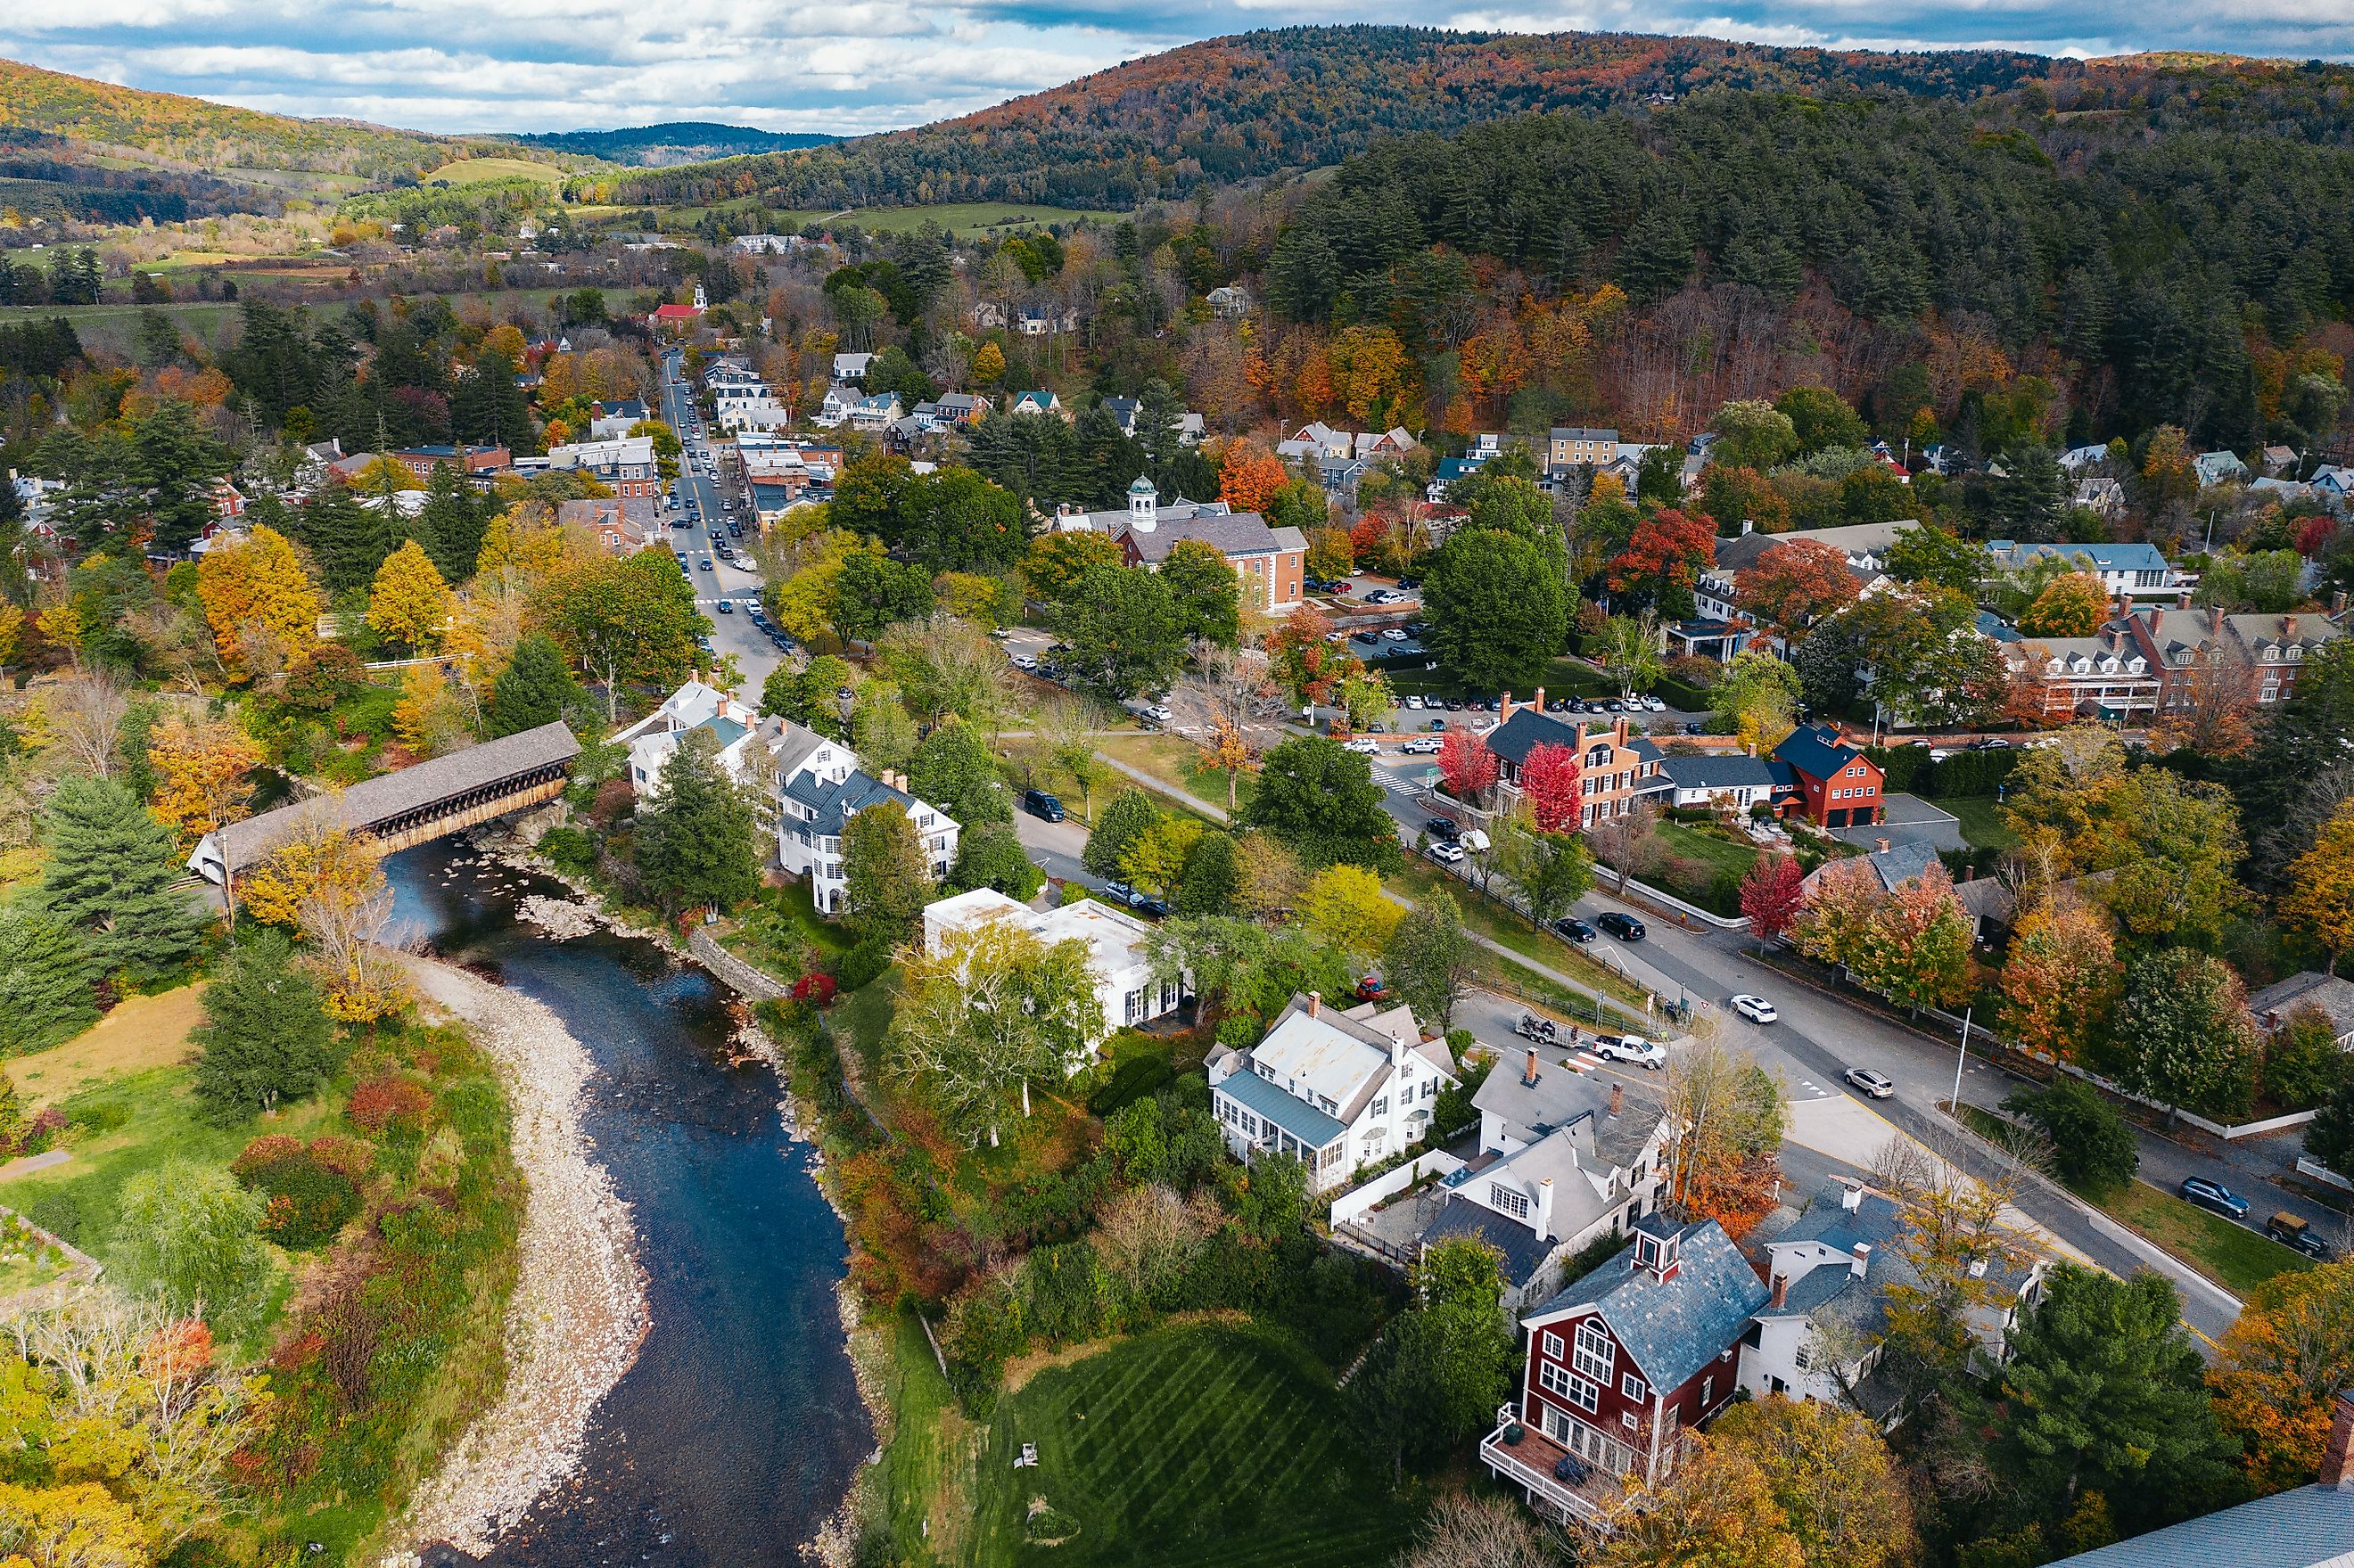 The picturesque town of Woodstock in Vermont.